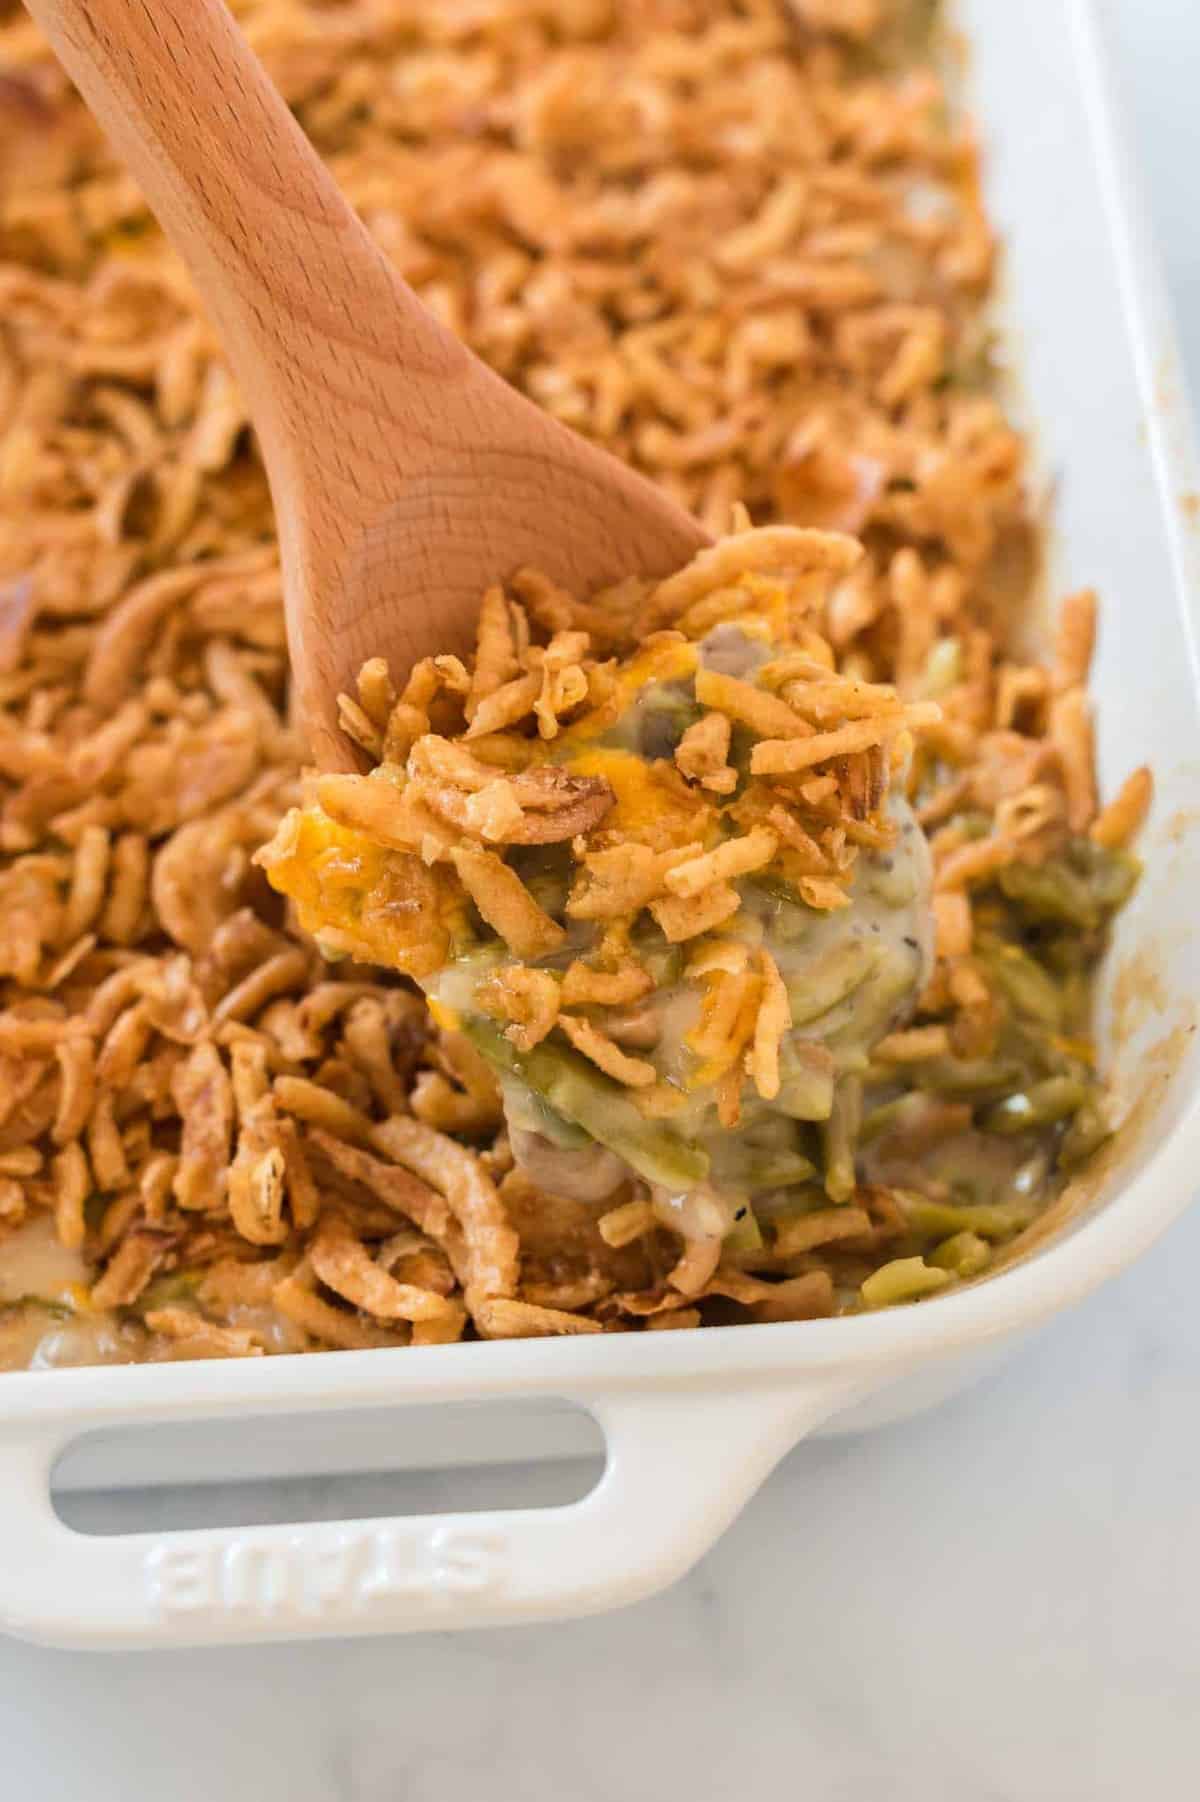 green bean casserole with a wooden spoon taking a scoop out